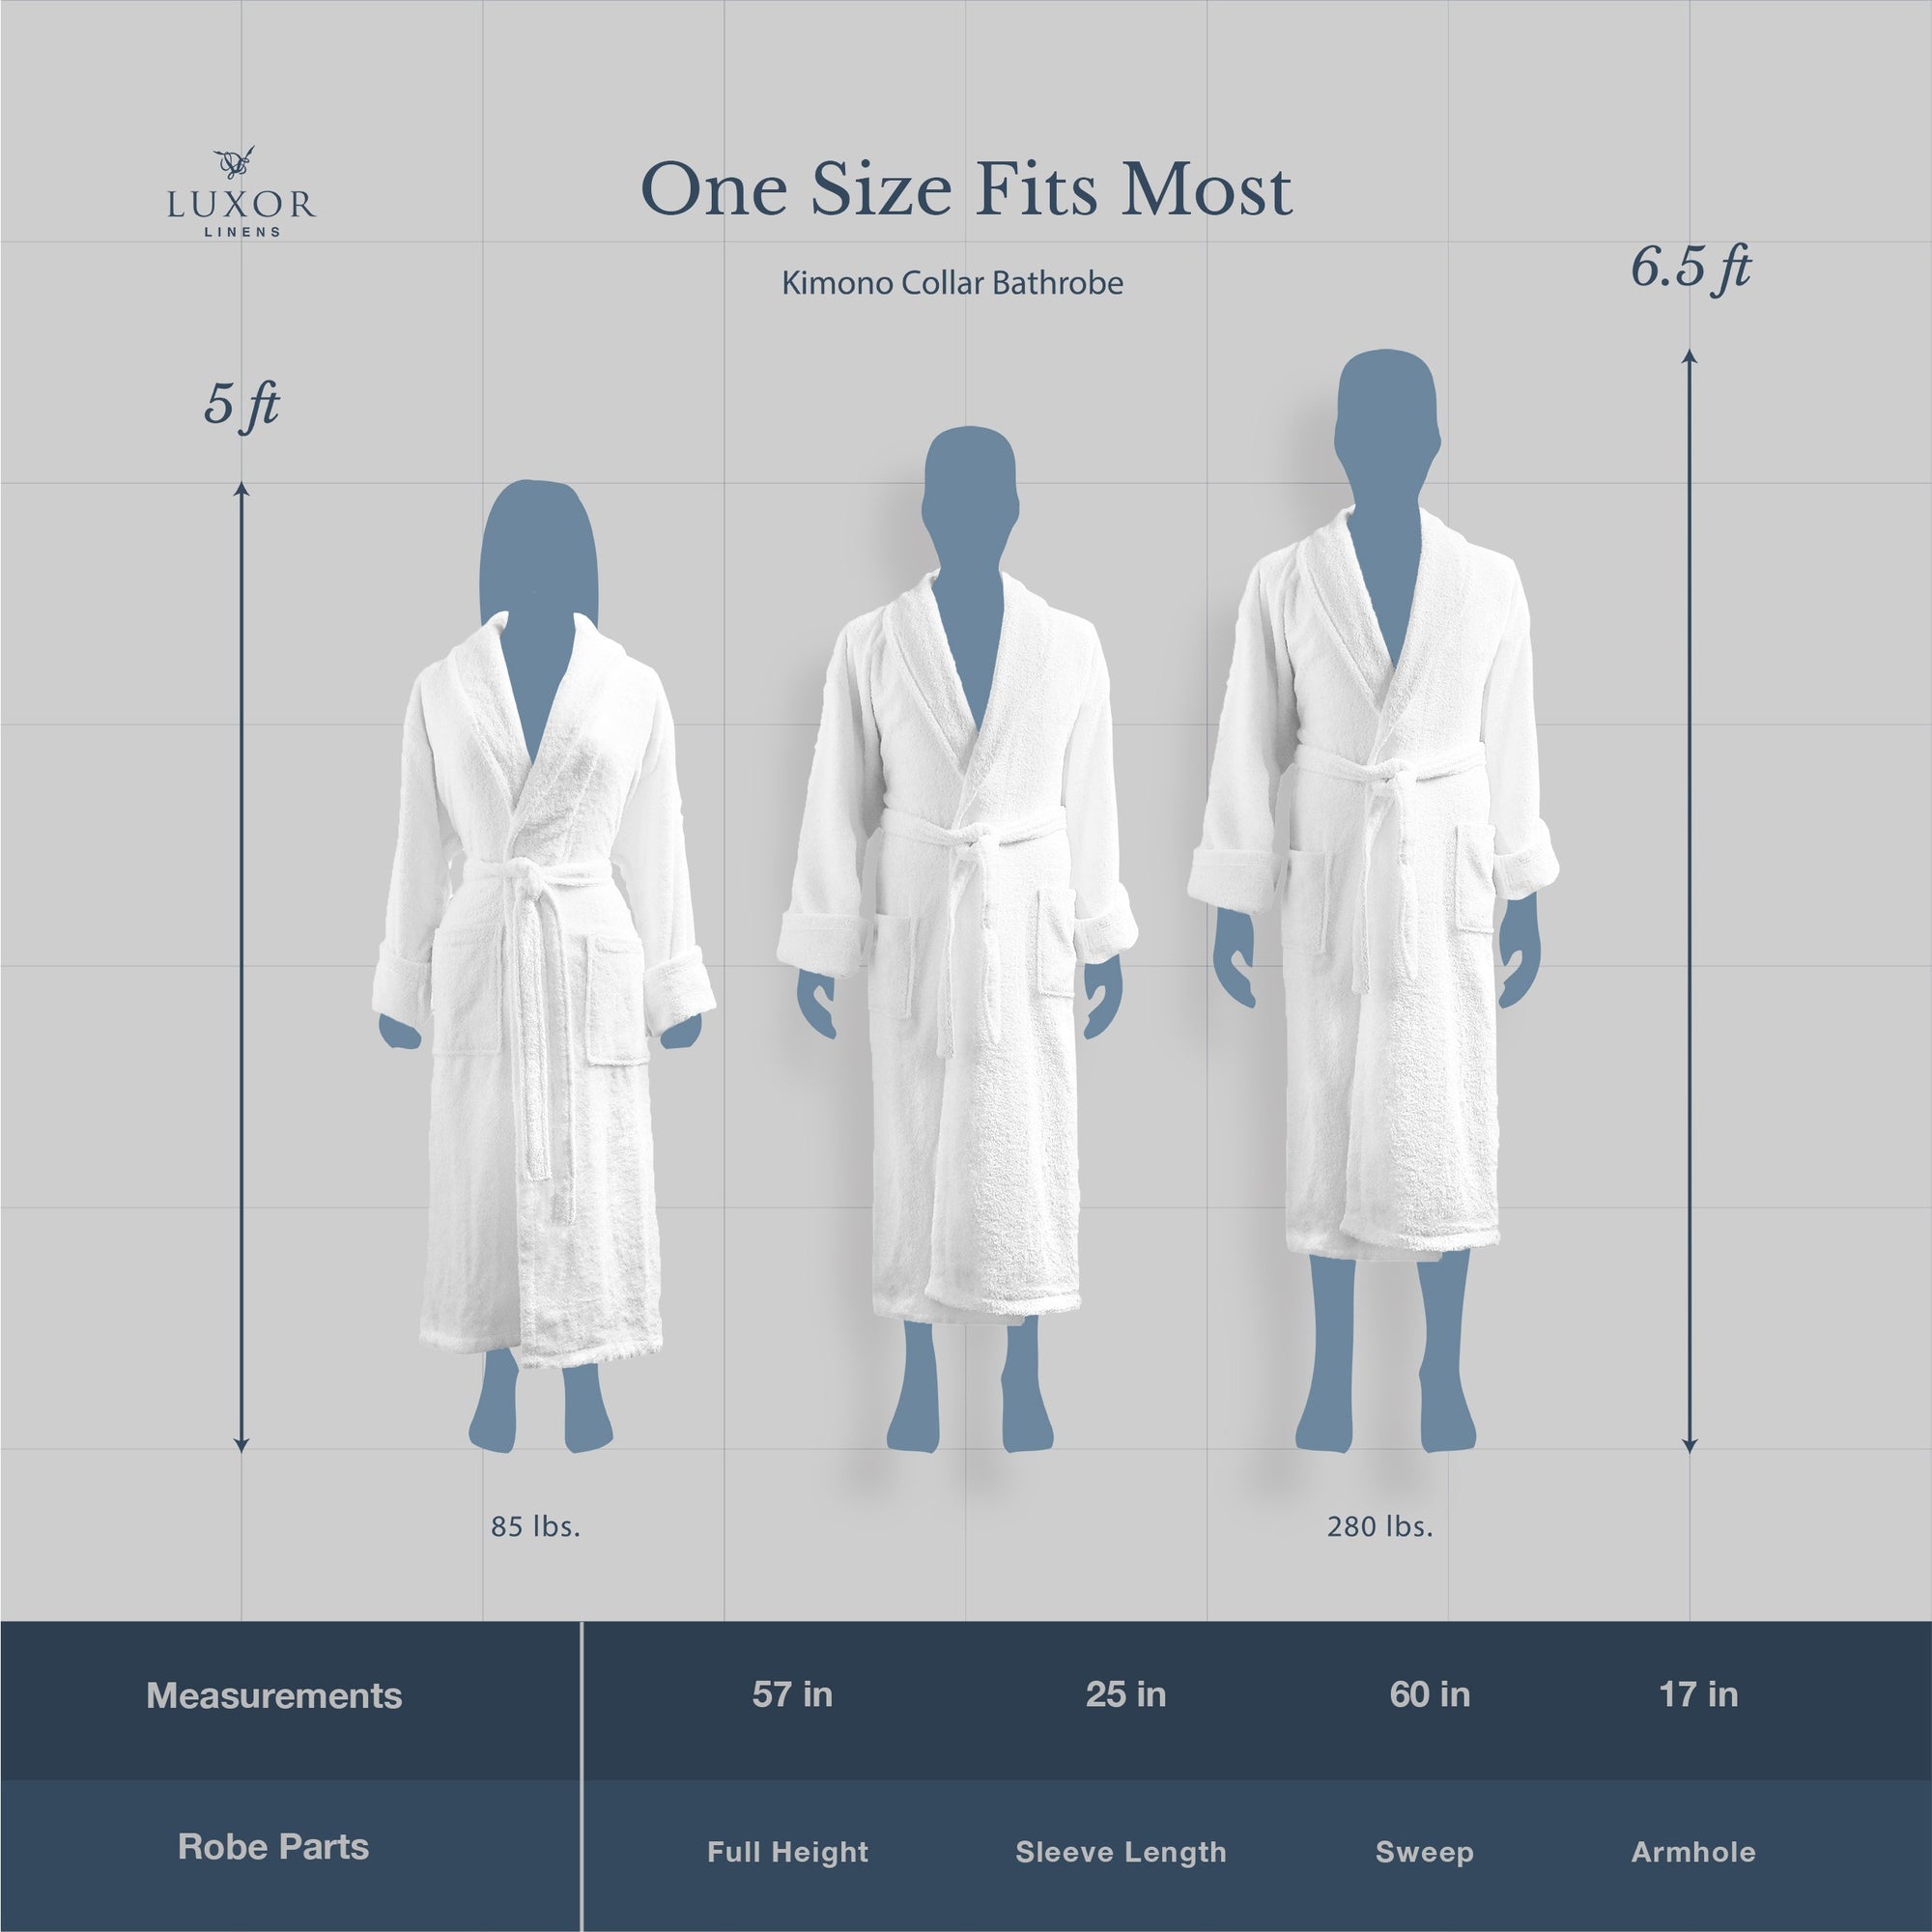 Choosing The Right Robe: Guide To Robe Fabric Types [INFOGRAPHIC]